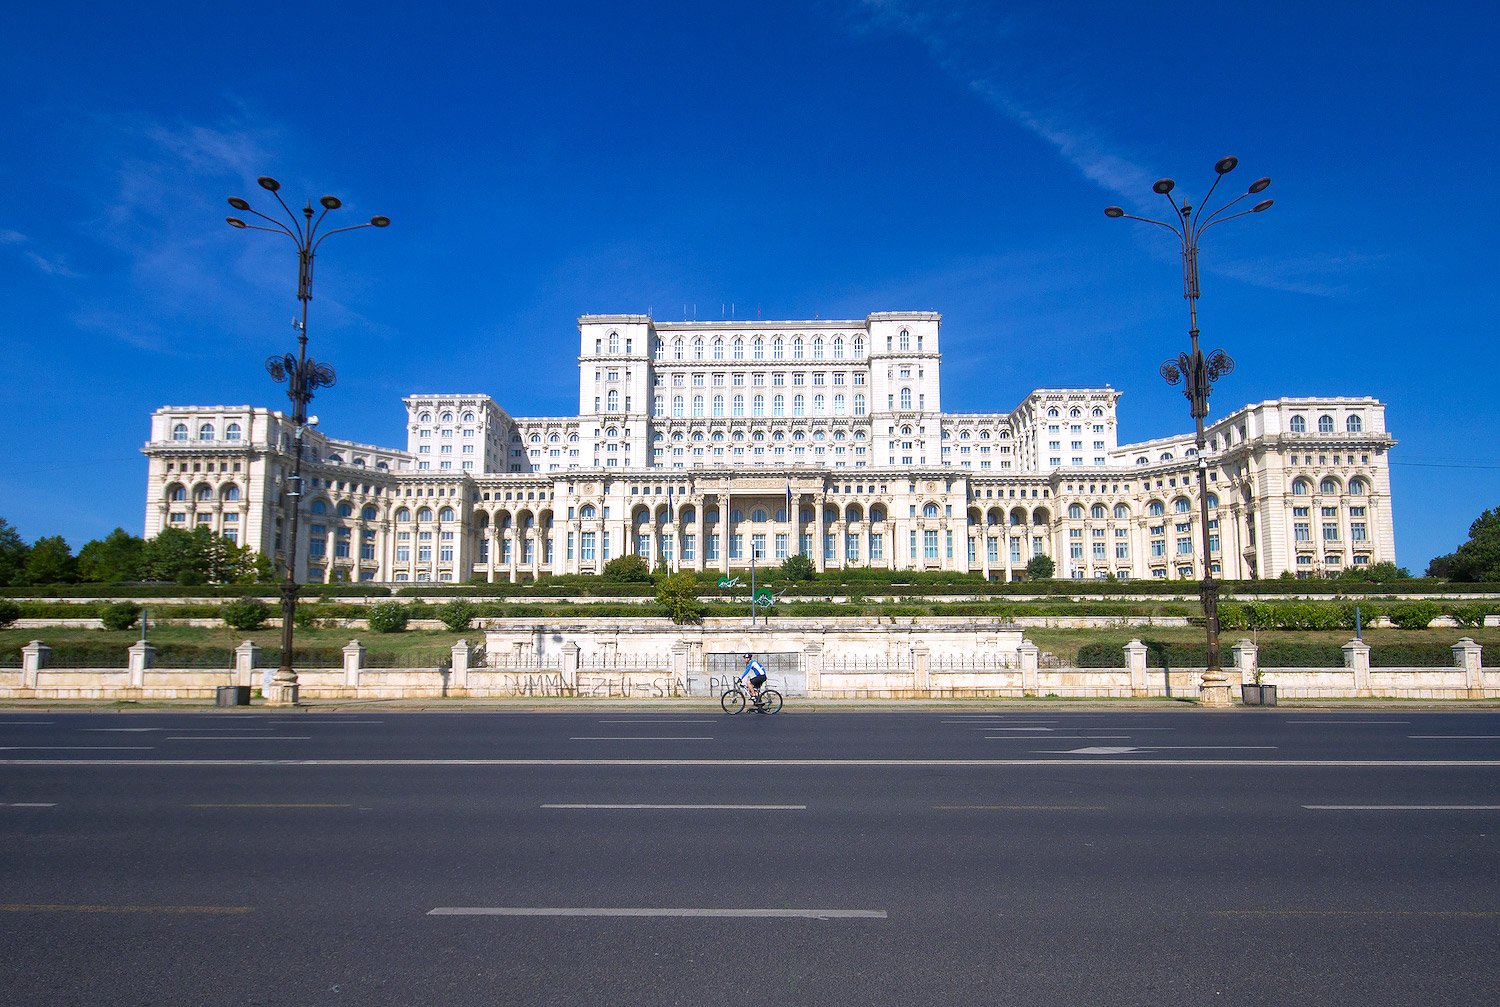 48 hours in Bucharest: explore the eclectic Romanian city that's alive with creative power